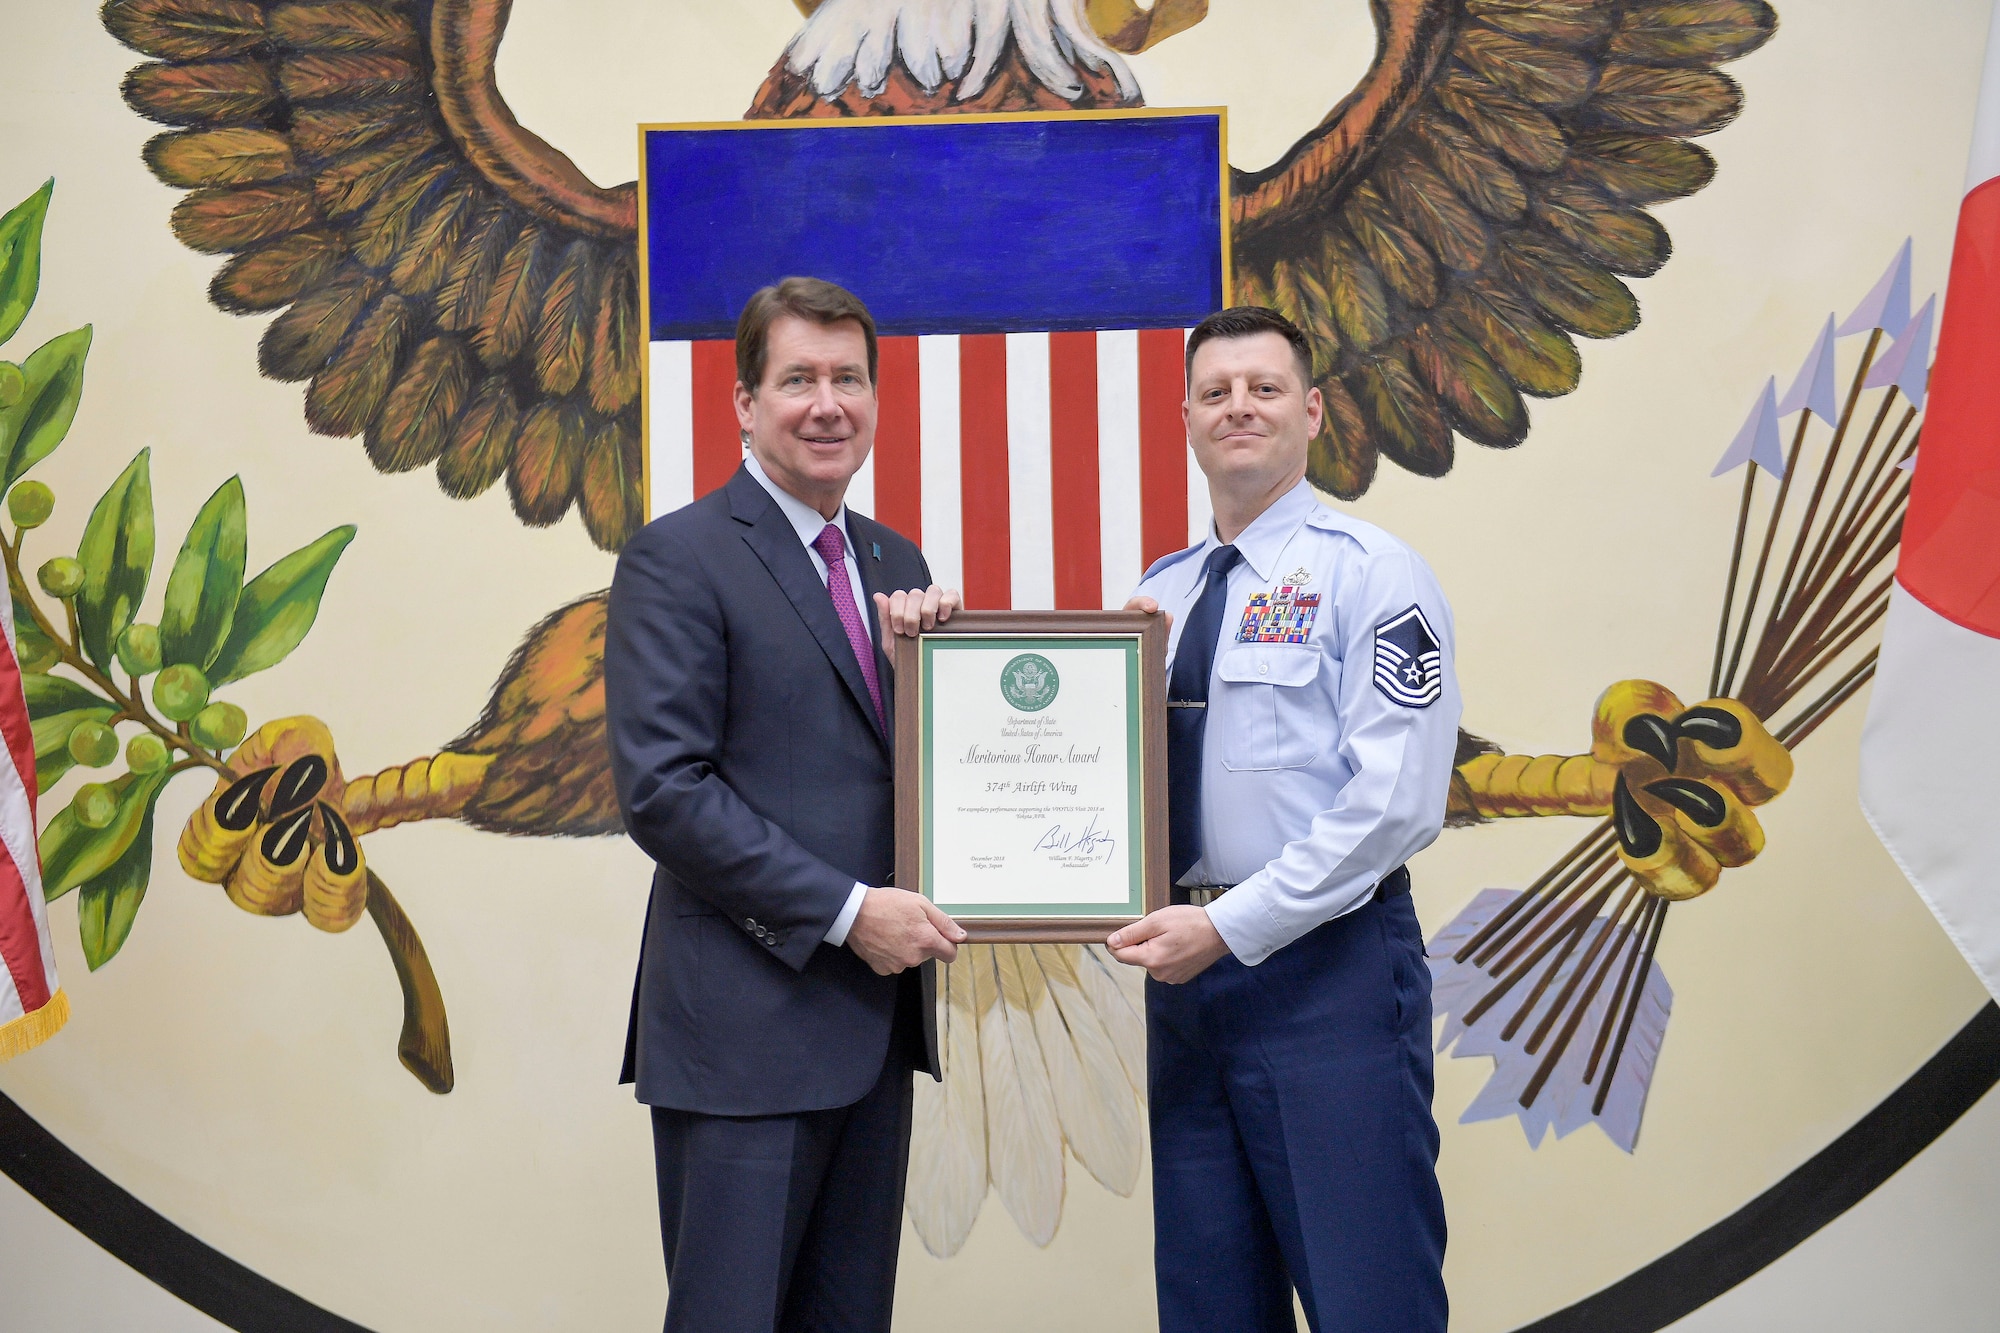 U.S. Ambassador to Japan William F. “Bill” Hagerty IV, and U.S. Air Force Master Sgt. Johnathan Marker, 374th Logistics Readiness Squadron fuels operation section chief, pose for a photo